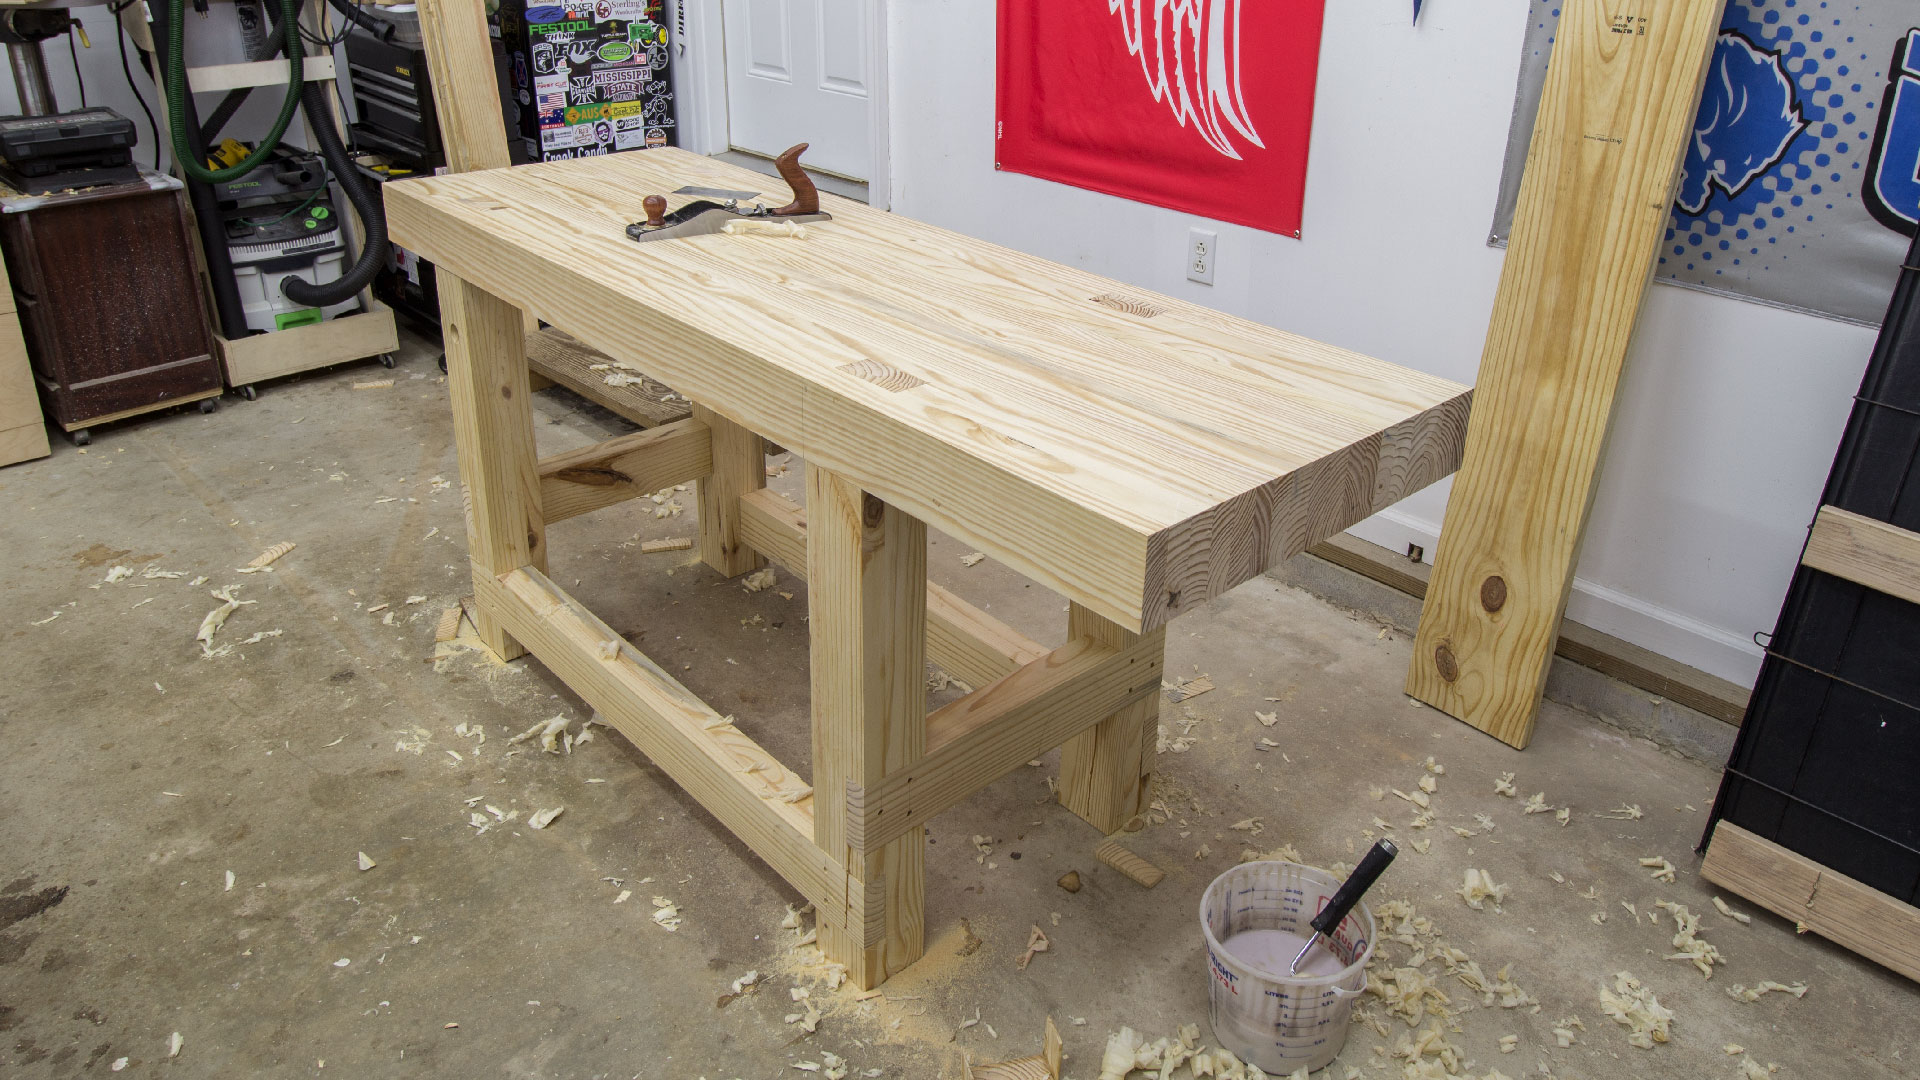 Jays woodworking bench